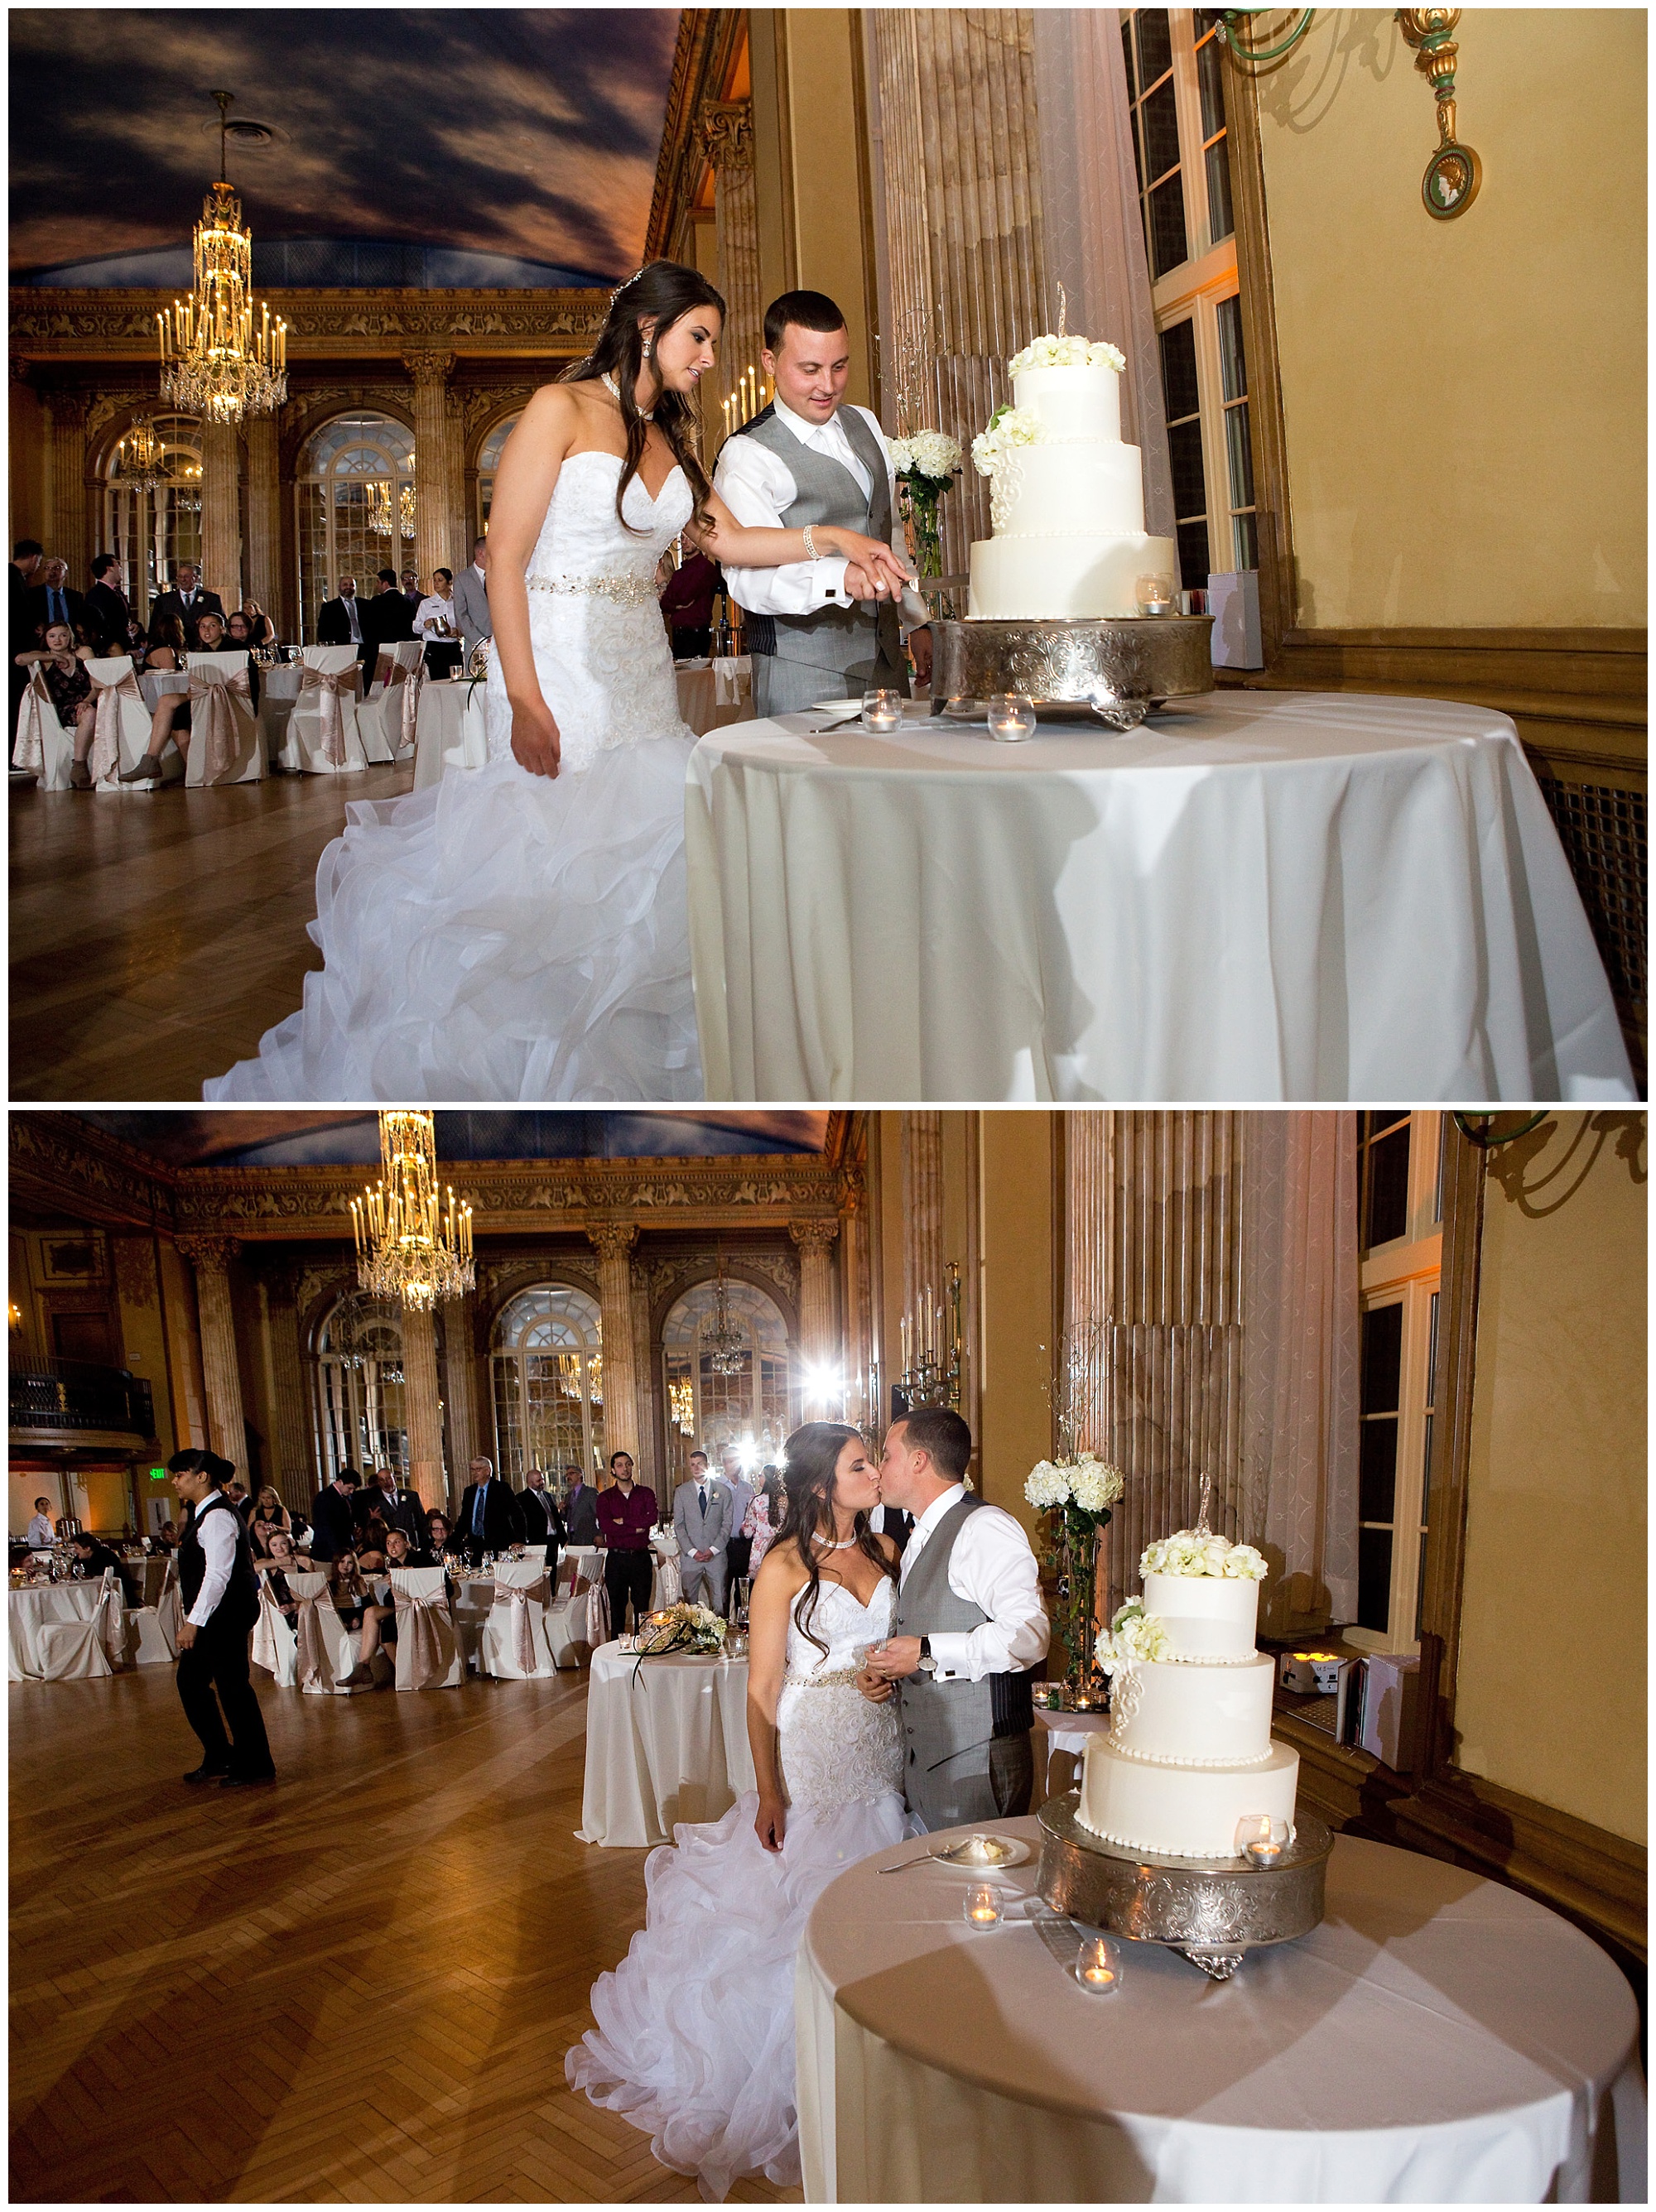 Photos of the bride and groom cutting thier wedding cake and another of them kissing.